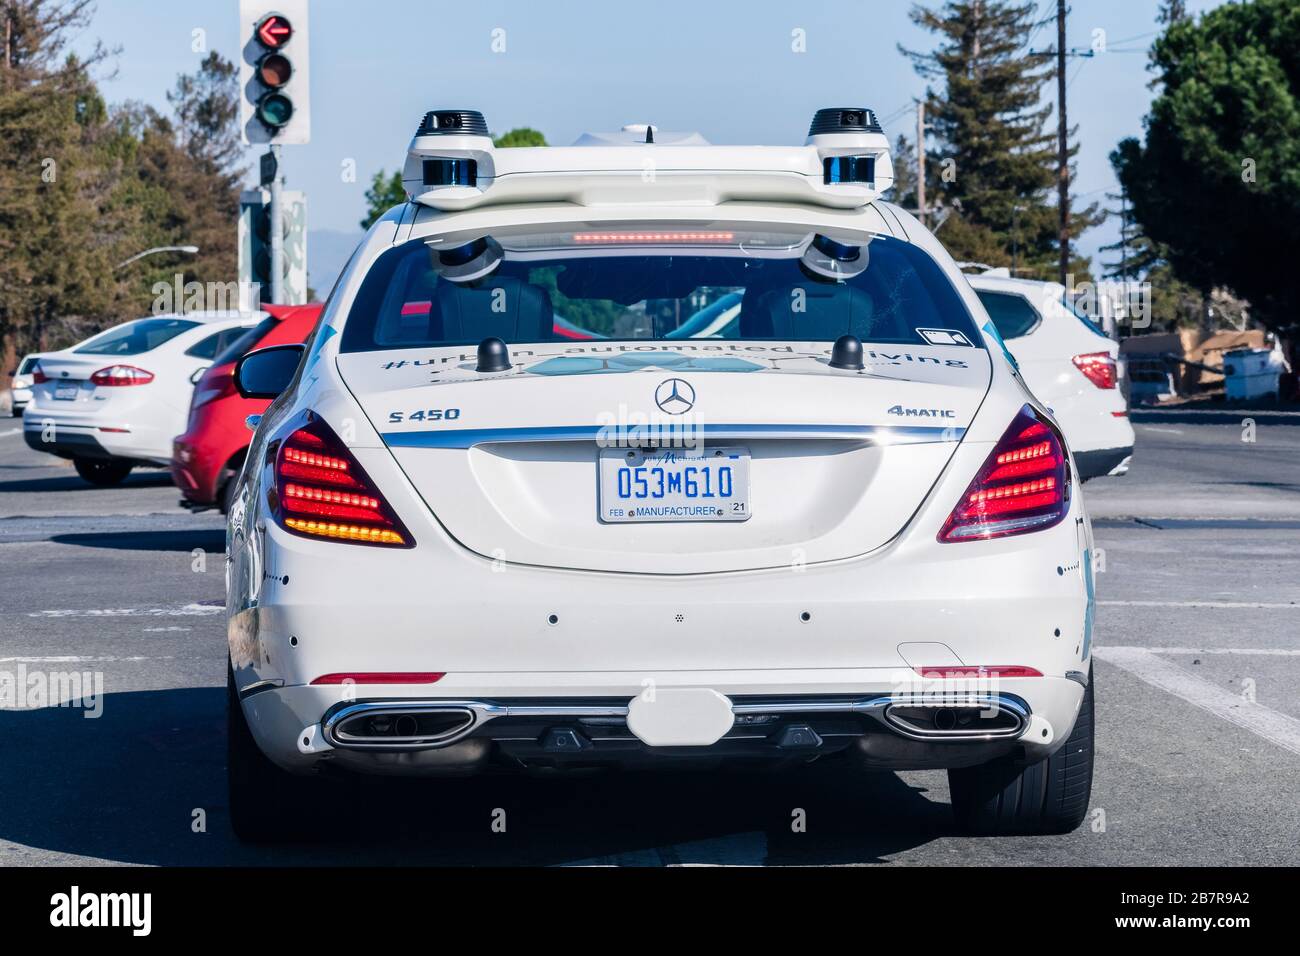 March 4, 2020 Santa Clara / CA / USA - Mercedes Benz self driving vehicle  performing tests on the streets of Silicon Valley; Daimler and Bosch partne Stock Photo